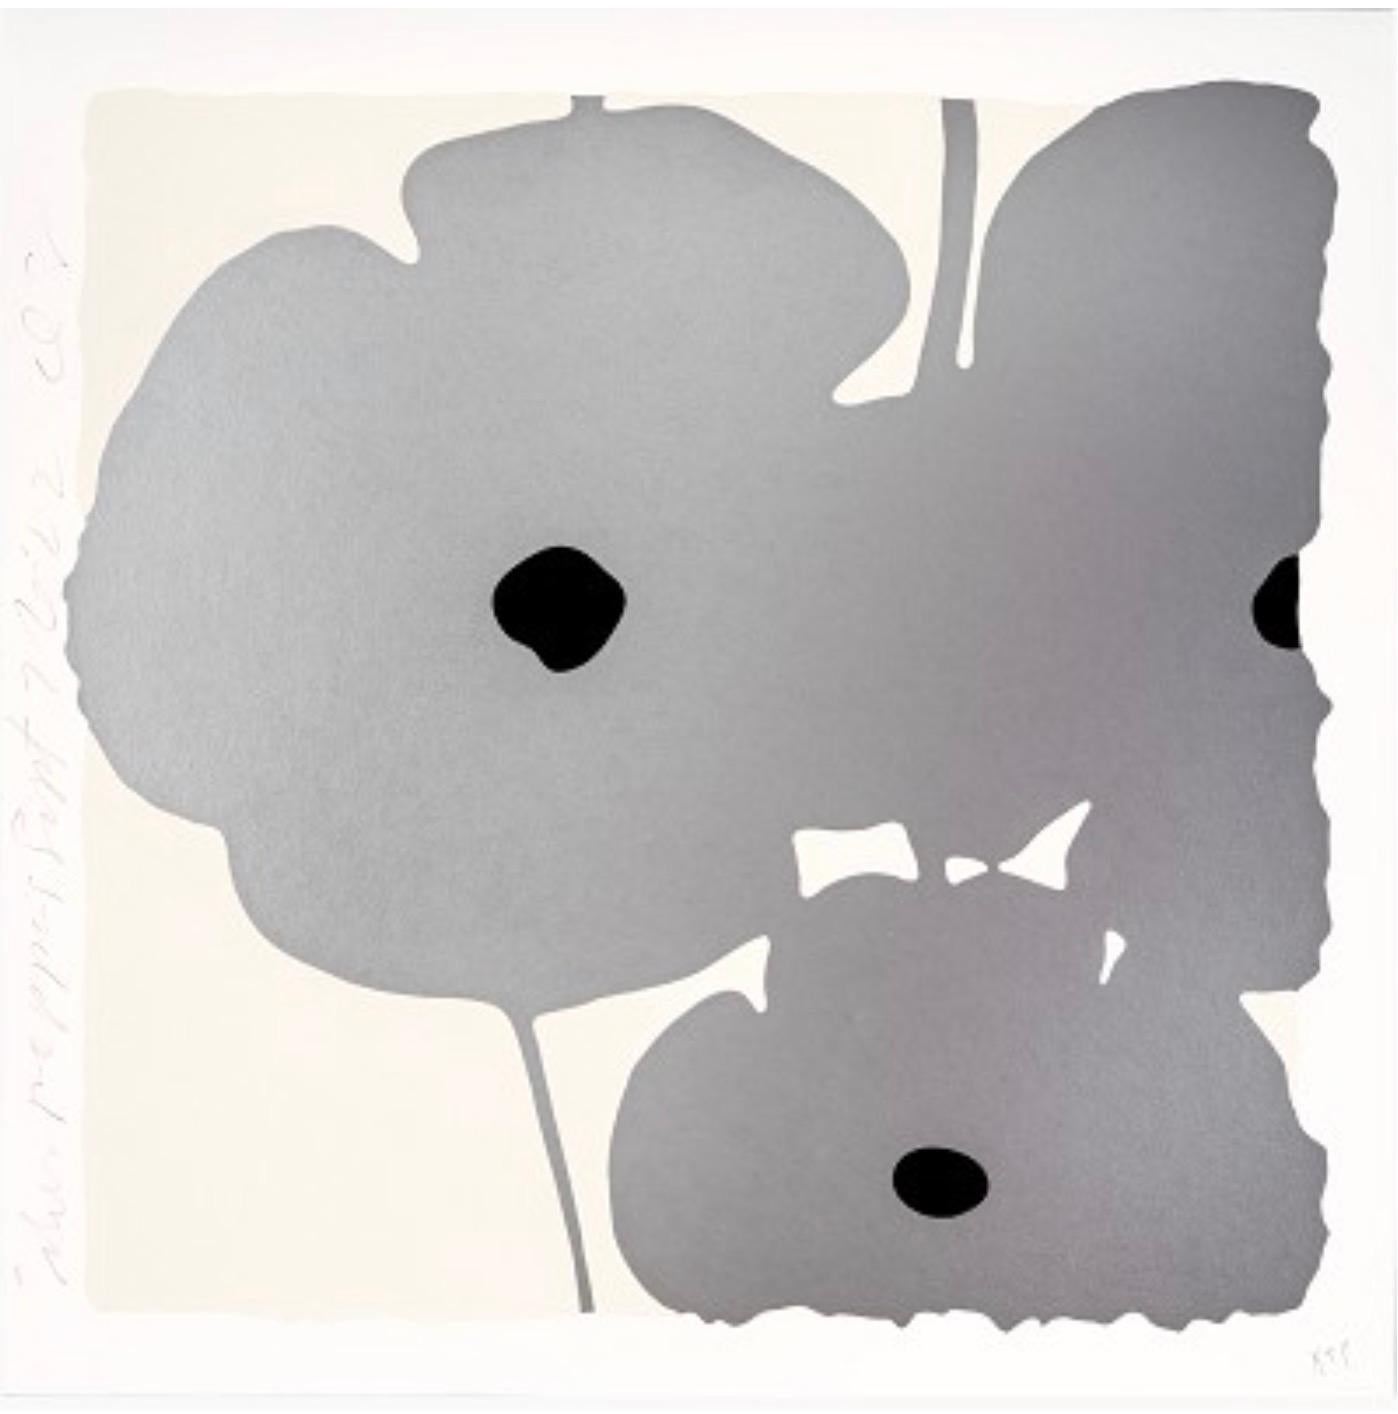 Donald Sultan Animal Print - Silver Poppies, Sept 7, 2022 (Ed: 22/50)